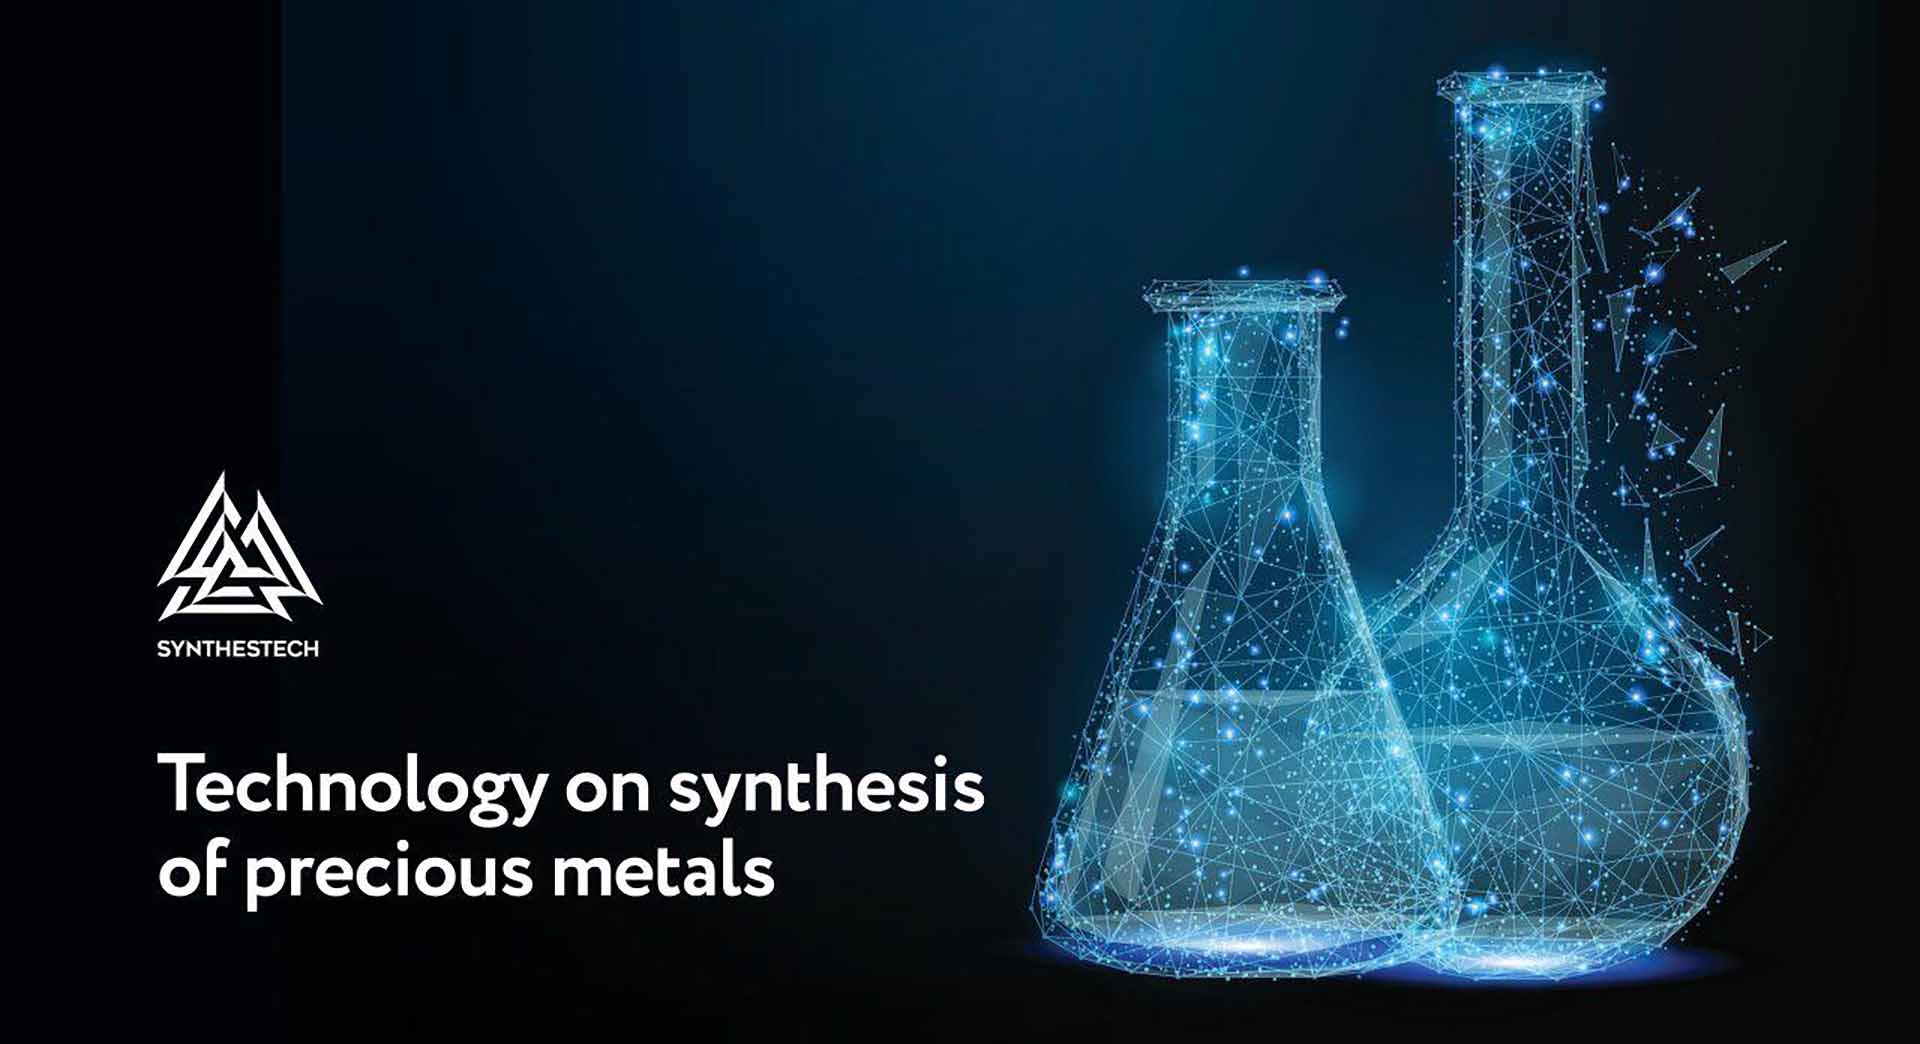 Synthestech Project on Synthesis of Valuable Metals Has Successfully Completed Pre-Sale and Launches ICO